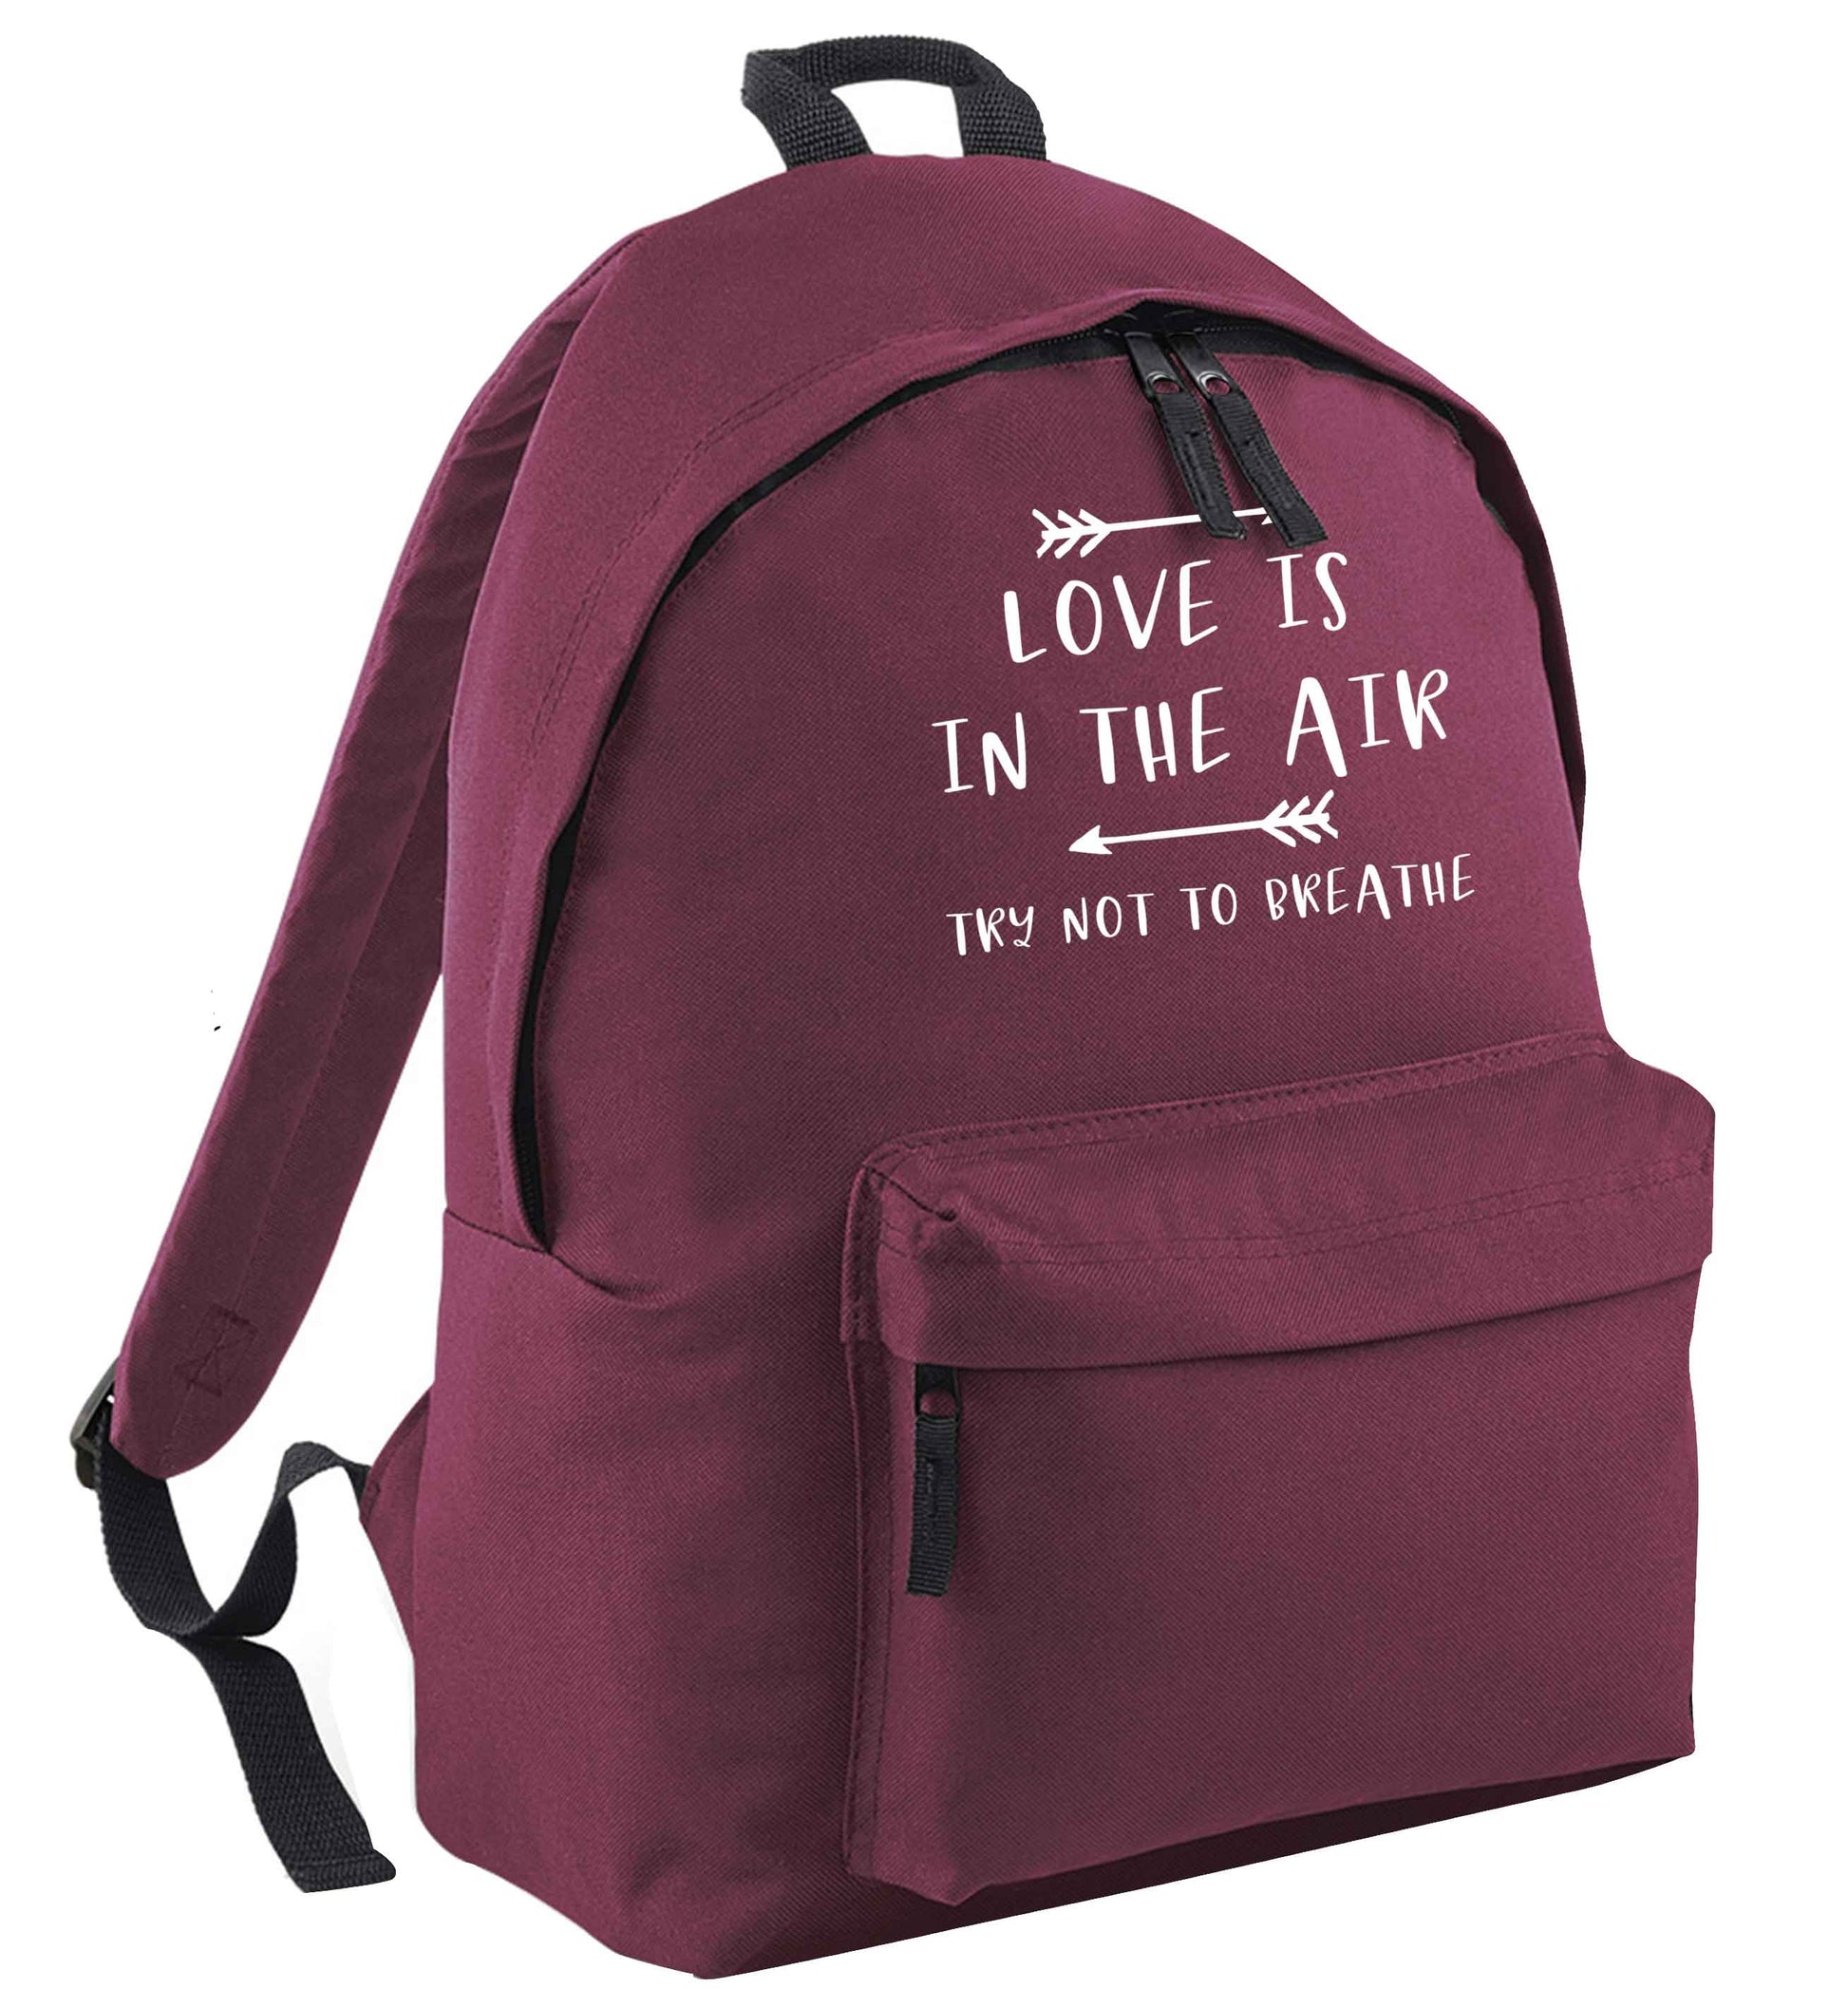 Love is in the air try not to breathe maroon adults backpack